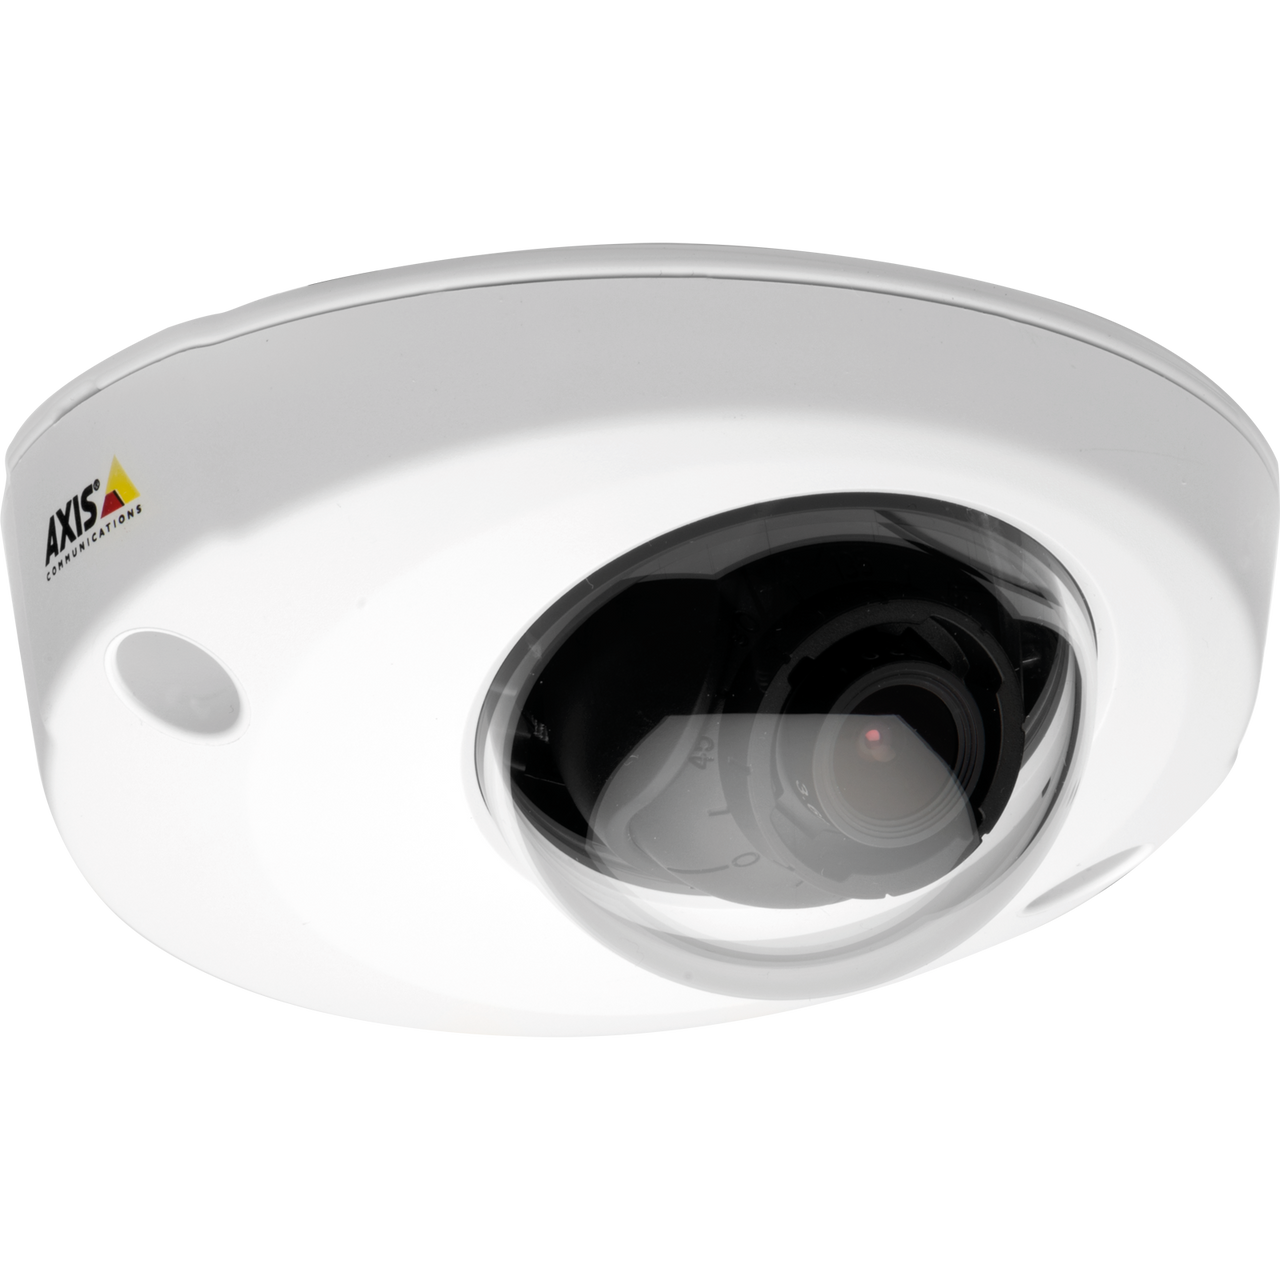 AXIS P3904-R Mk II M12 Onboard HDTV 720p surveillance with Zipstream